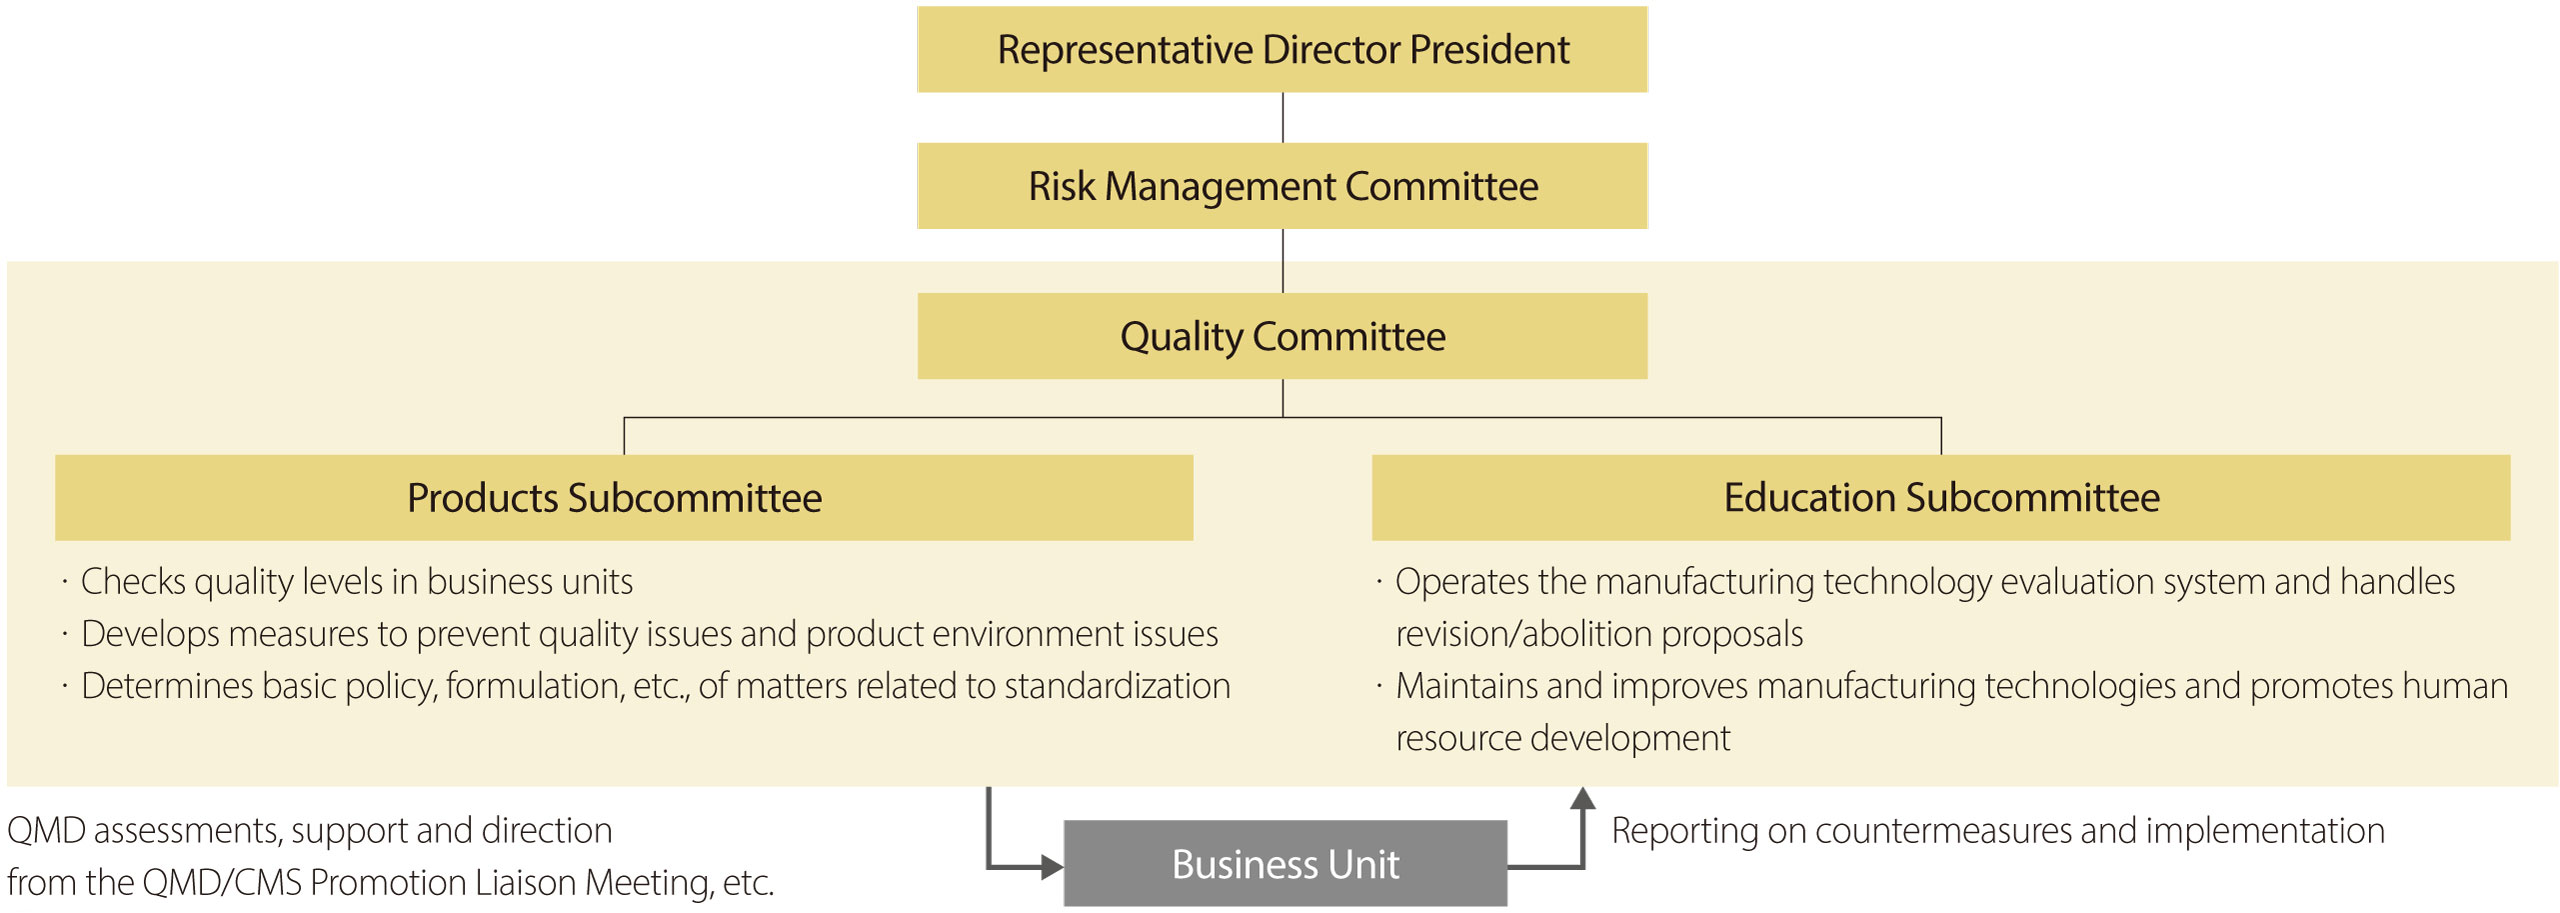 Representative Director President / Risk Management Committee / Quality Committee / Products Subcommittee: ・Checks quality levels in business units ・Develops measures to prevent quality issues and product environment issues ・Determines basic policy, formulation, etc. of matters related to standardization / Education Subcommittee: ・Operates the manufacturing technology evaluation system, and handles revision/abolition proposals ・Maintains and improves manufacturing technologies, and promotes human resource development / QMD assessments, support/direction by QMD/CMS Promotion Liaison Meeting etc. / Business Unit / Reporting on countermeasures and implementation